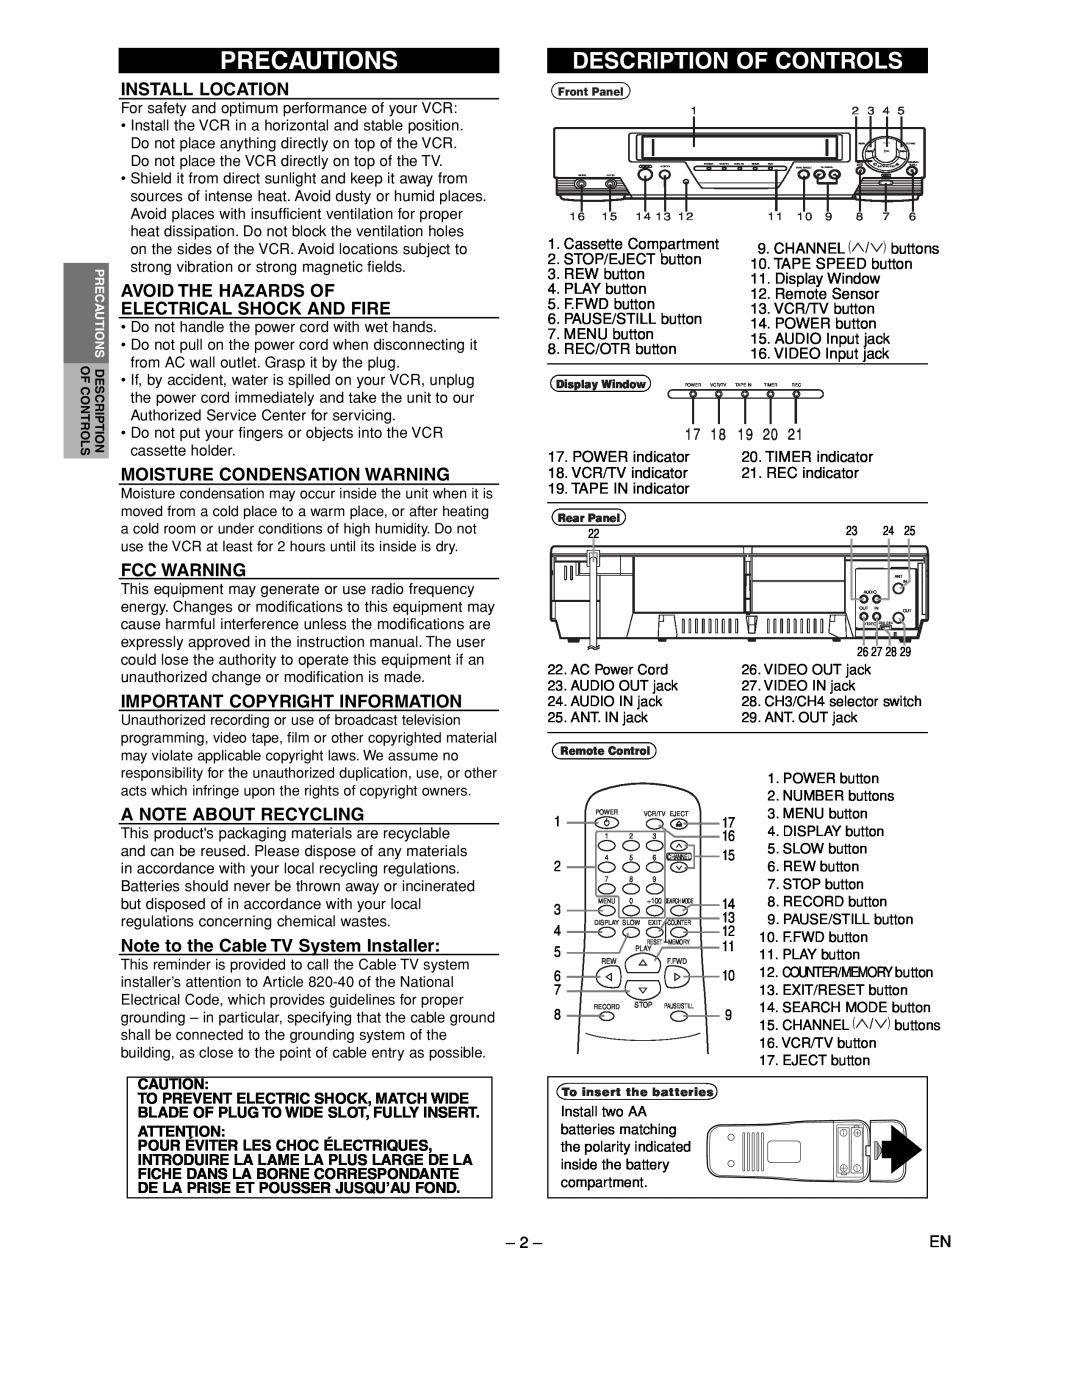 Sylvania 6240VC owner manual Precautions, Install Location, Avoid The Hazards Of Electrical Shock And Fire, Fcc Warning 